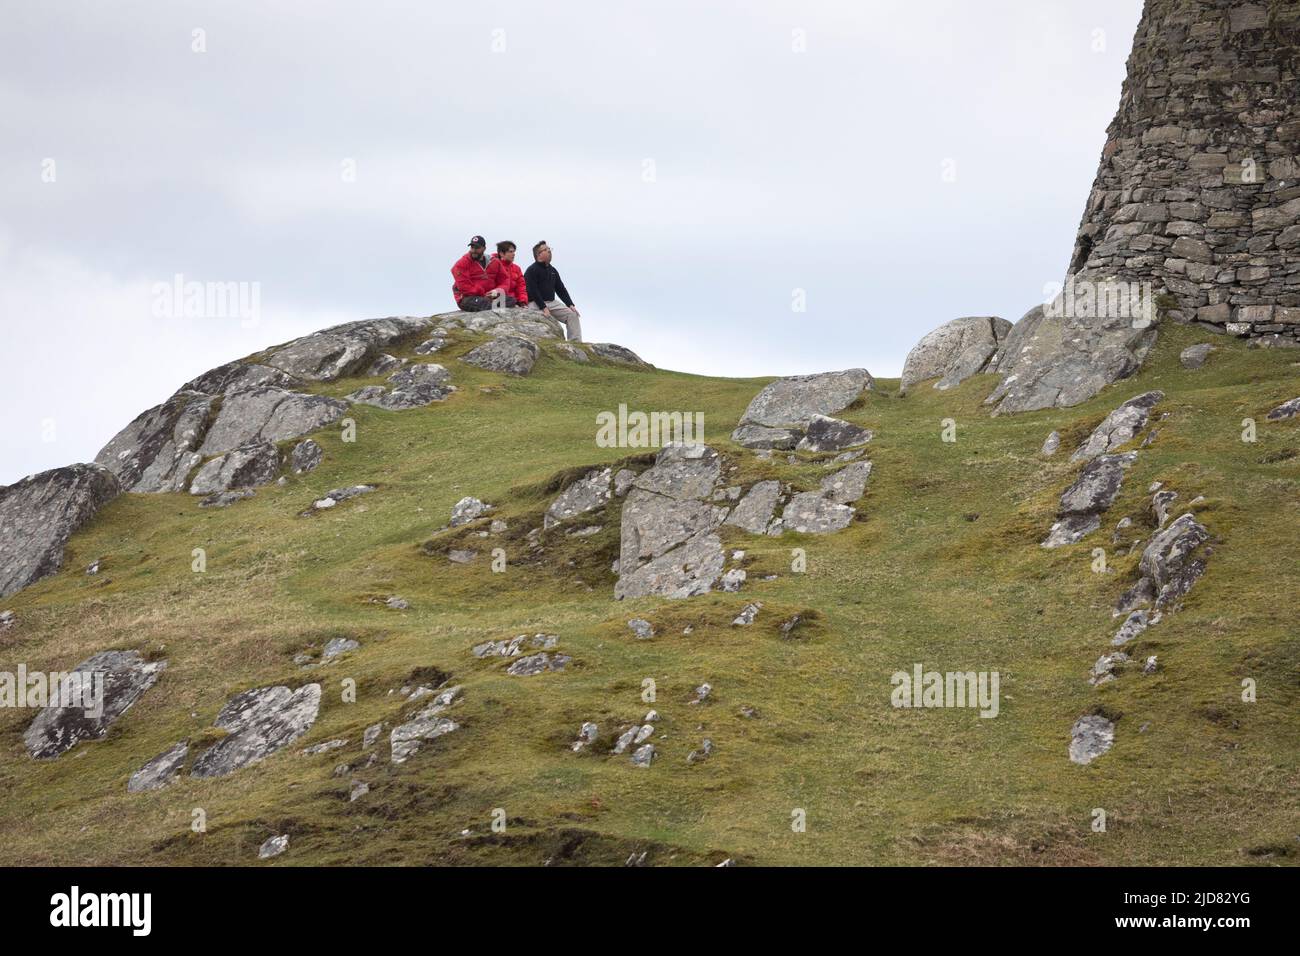 People in landscape of the Isle of Lewis in April, near Dun Carloway, Outer Hebrides, Scotland, United Kingdom Stock Photo